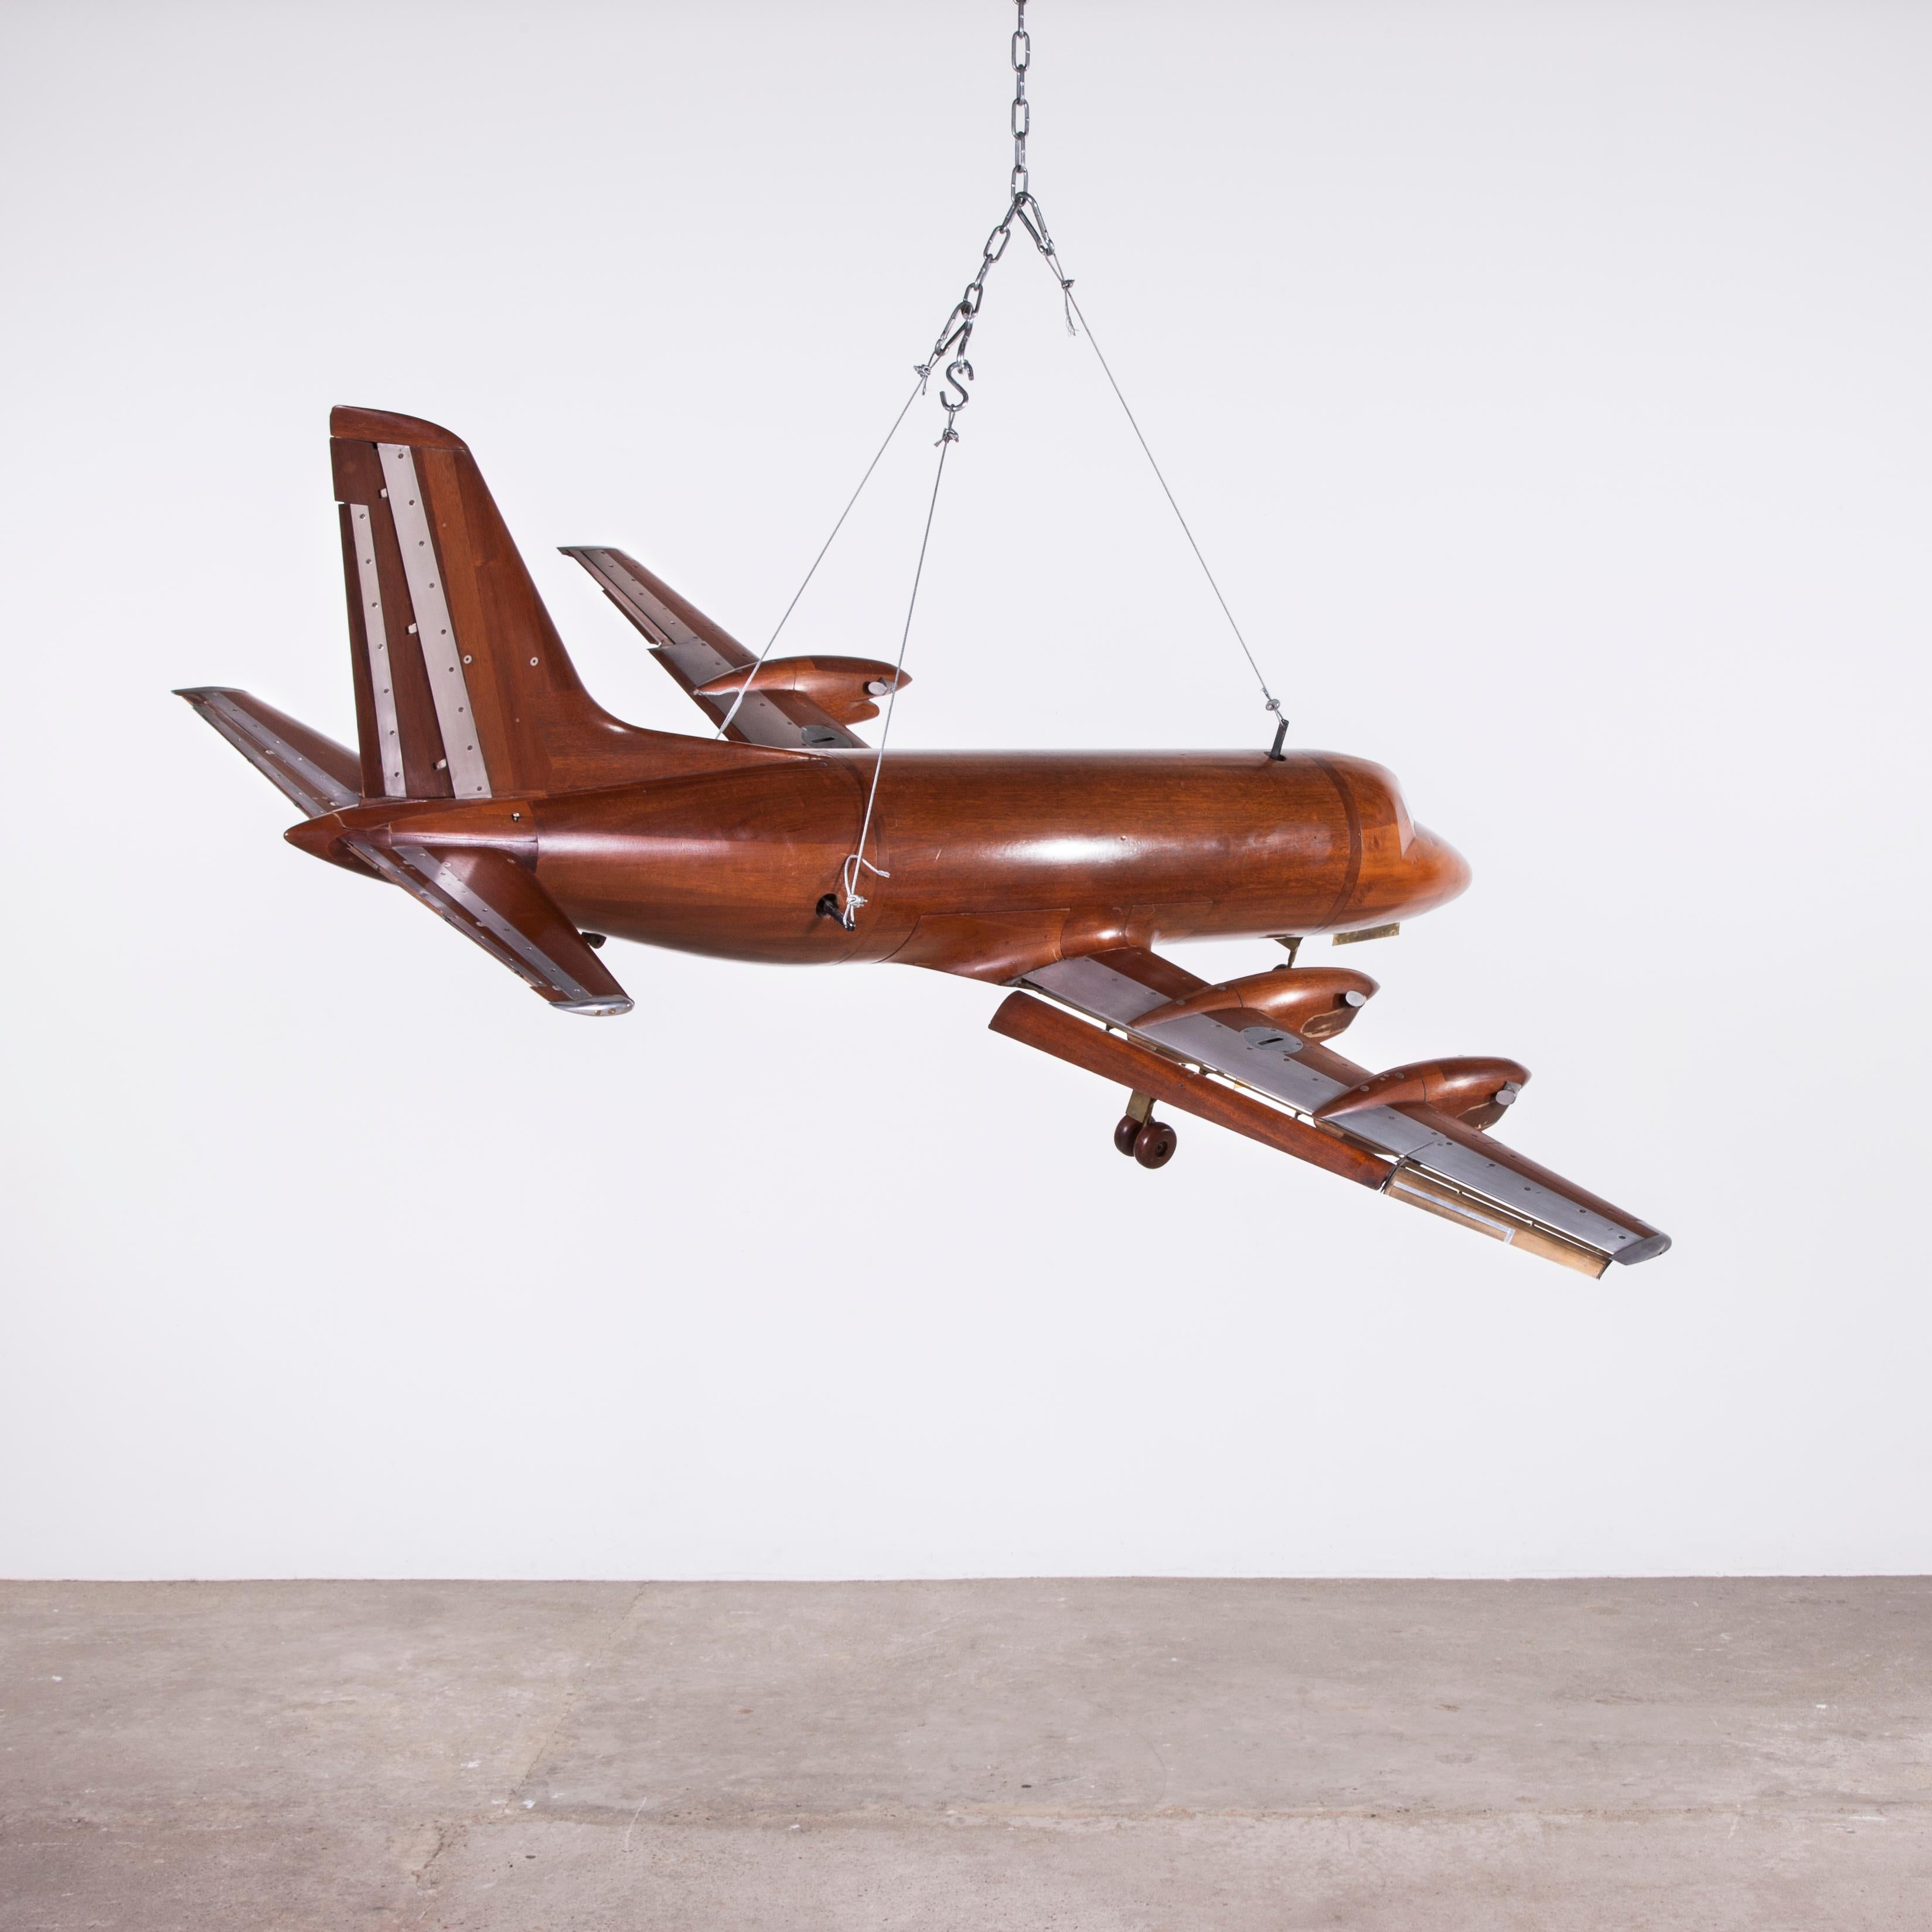 Industrial Aircraft Design Wind Tunnel Scale Model of a Late 1960s GAC-100 Airliner For Sale